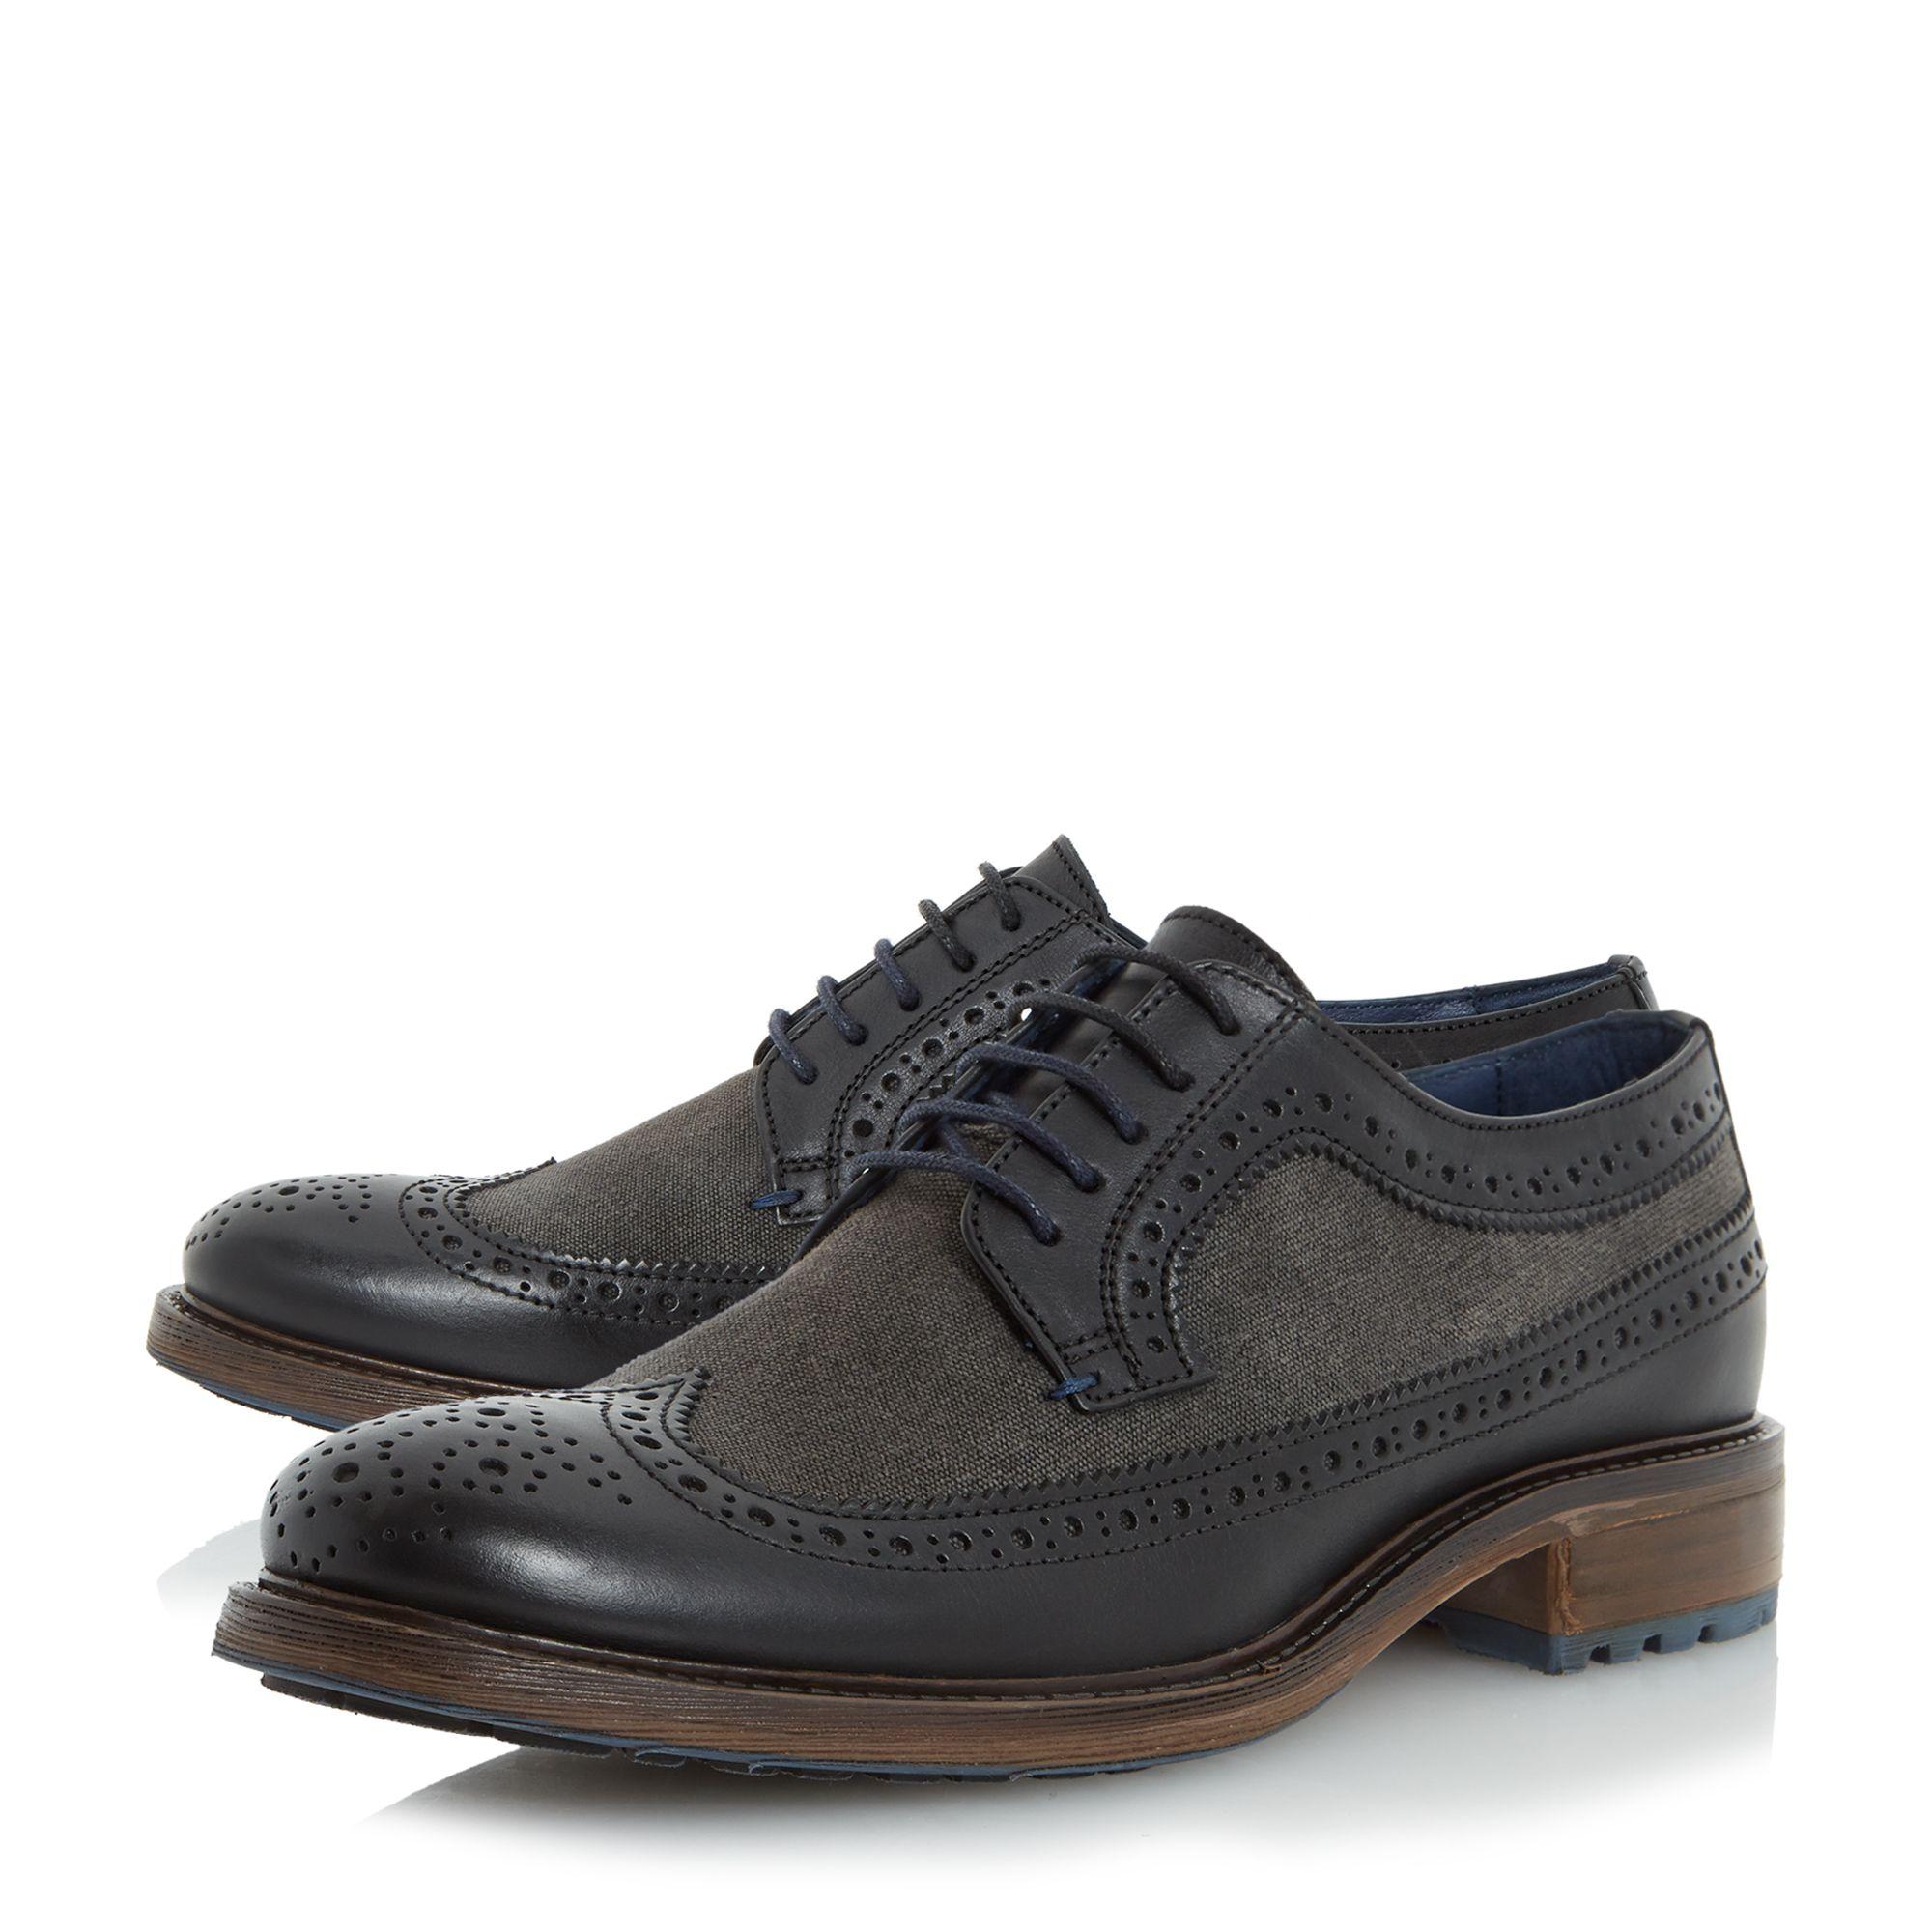 Lyst Dune  Bongle Mixed Material Brogue Shoes  in Black 